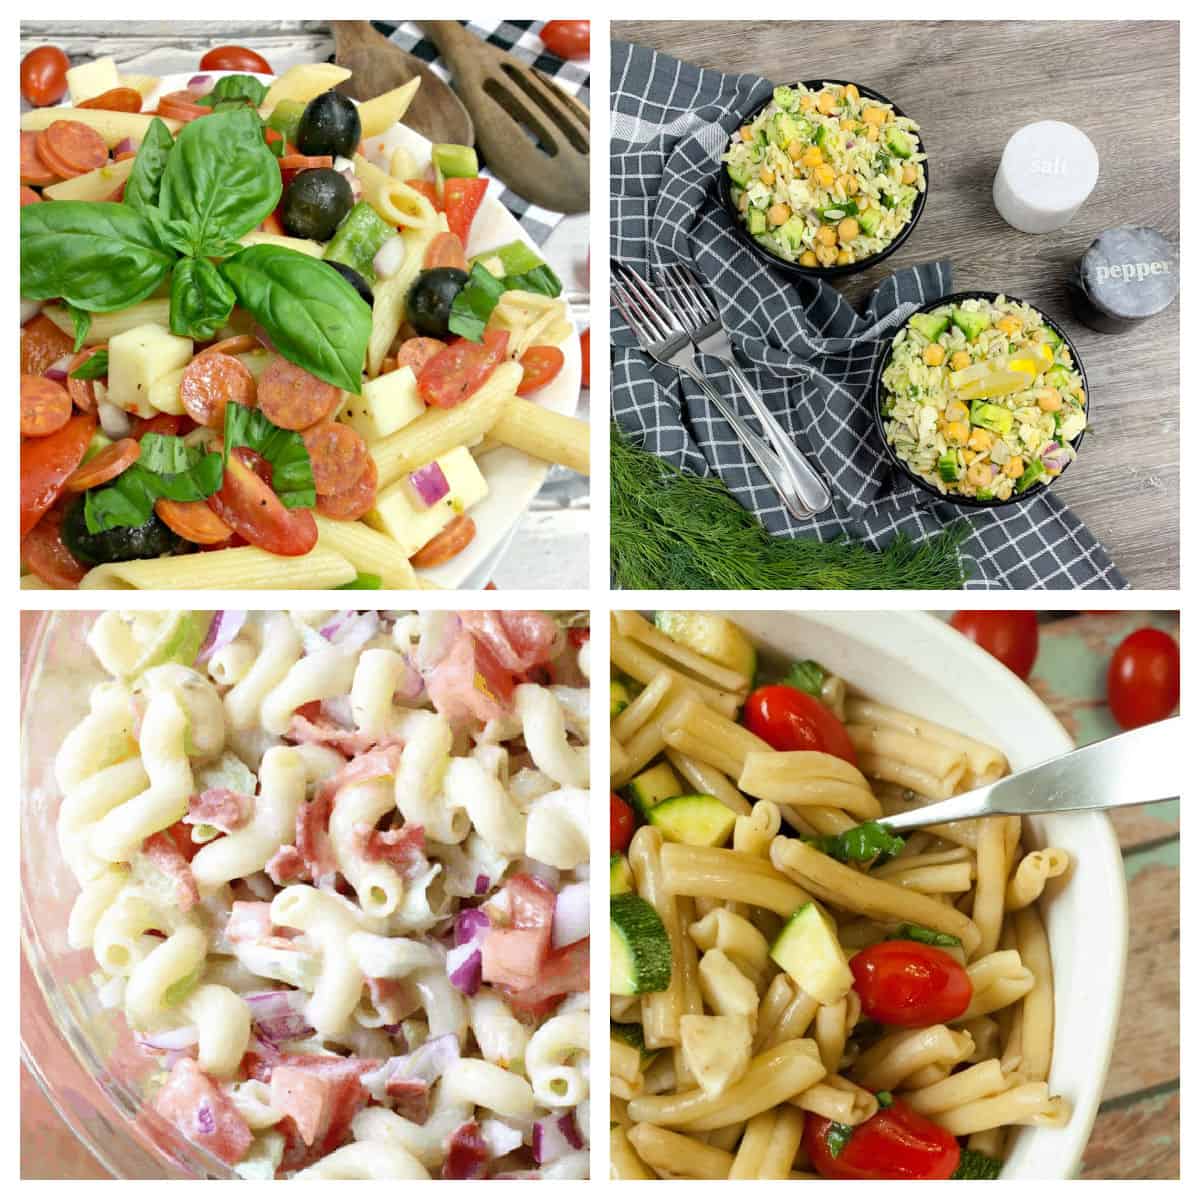 Pasta salad dishes in a collage.